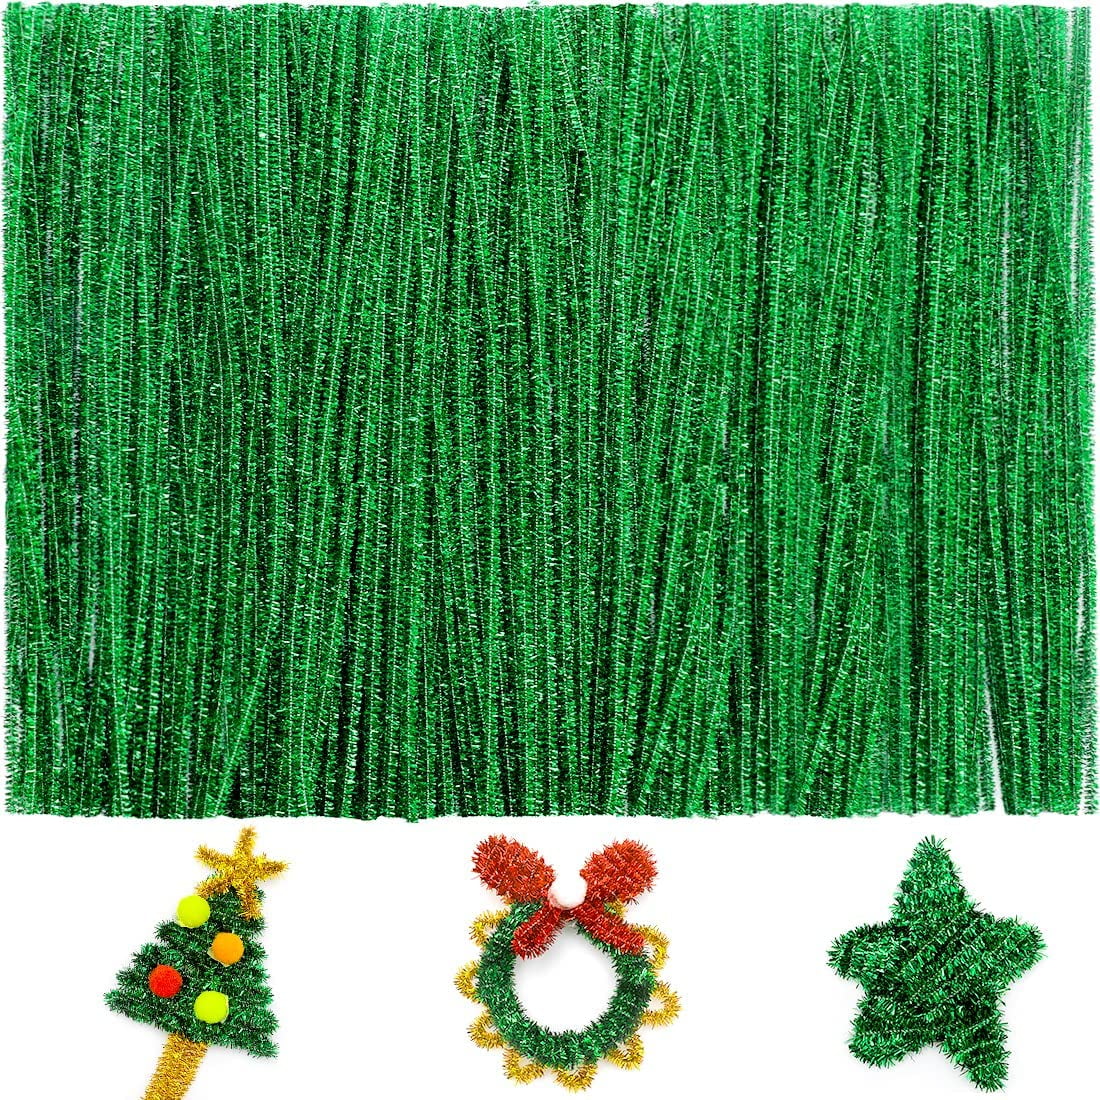 NANASO 300pcs Glitter Pipe Cleaners Tinsel Chenille Stems,10 Colors Metallic Pipe Cleaner for Creative Crafts Decorations,Tinsel Chenille Stems for for DIY